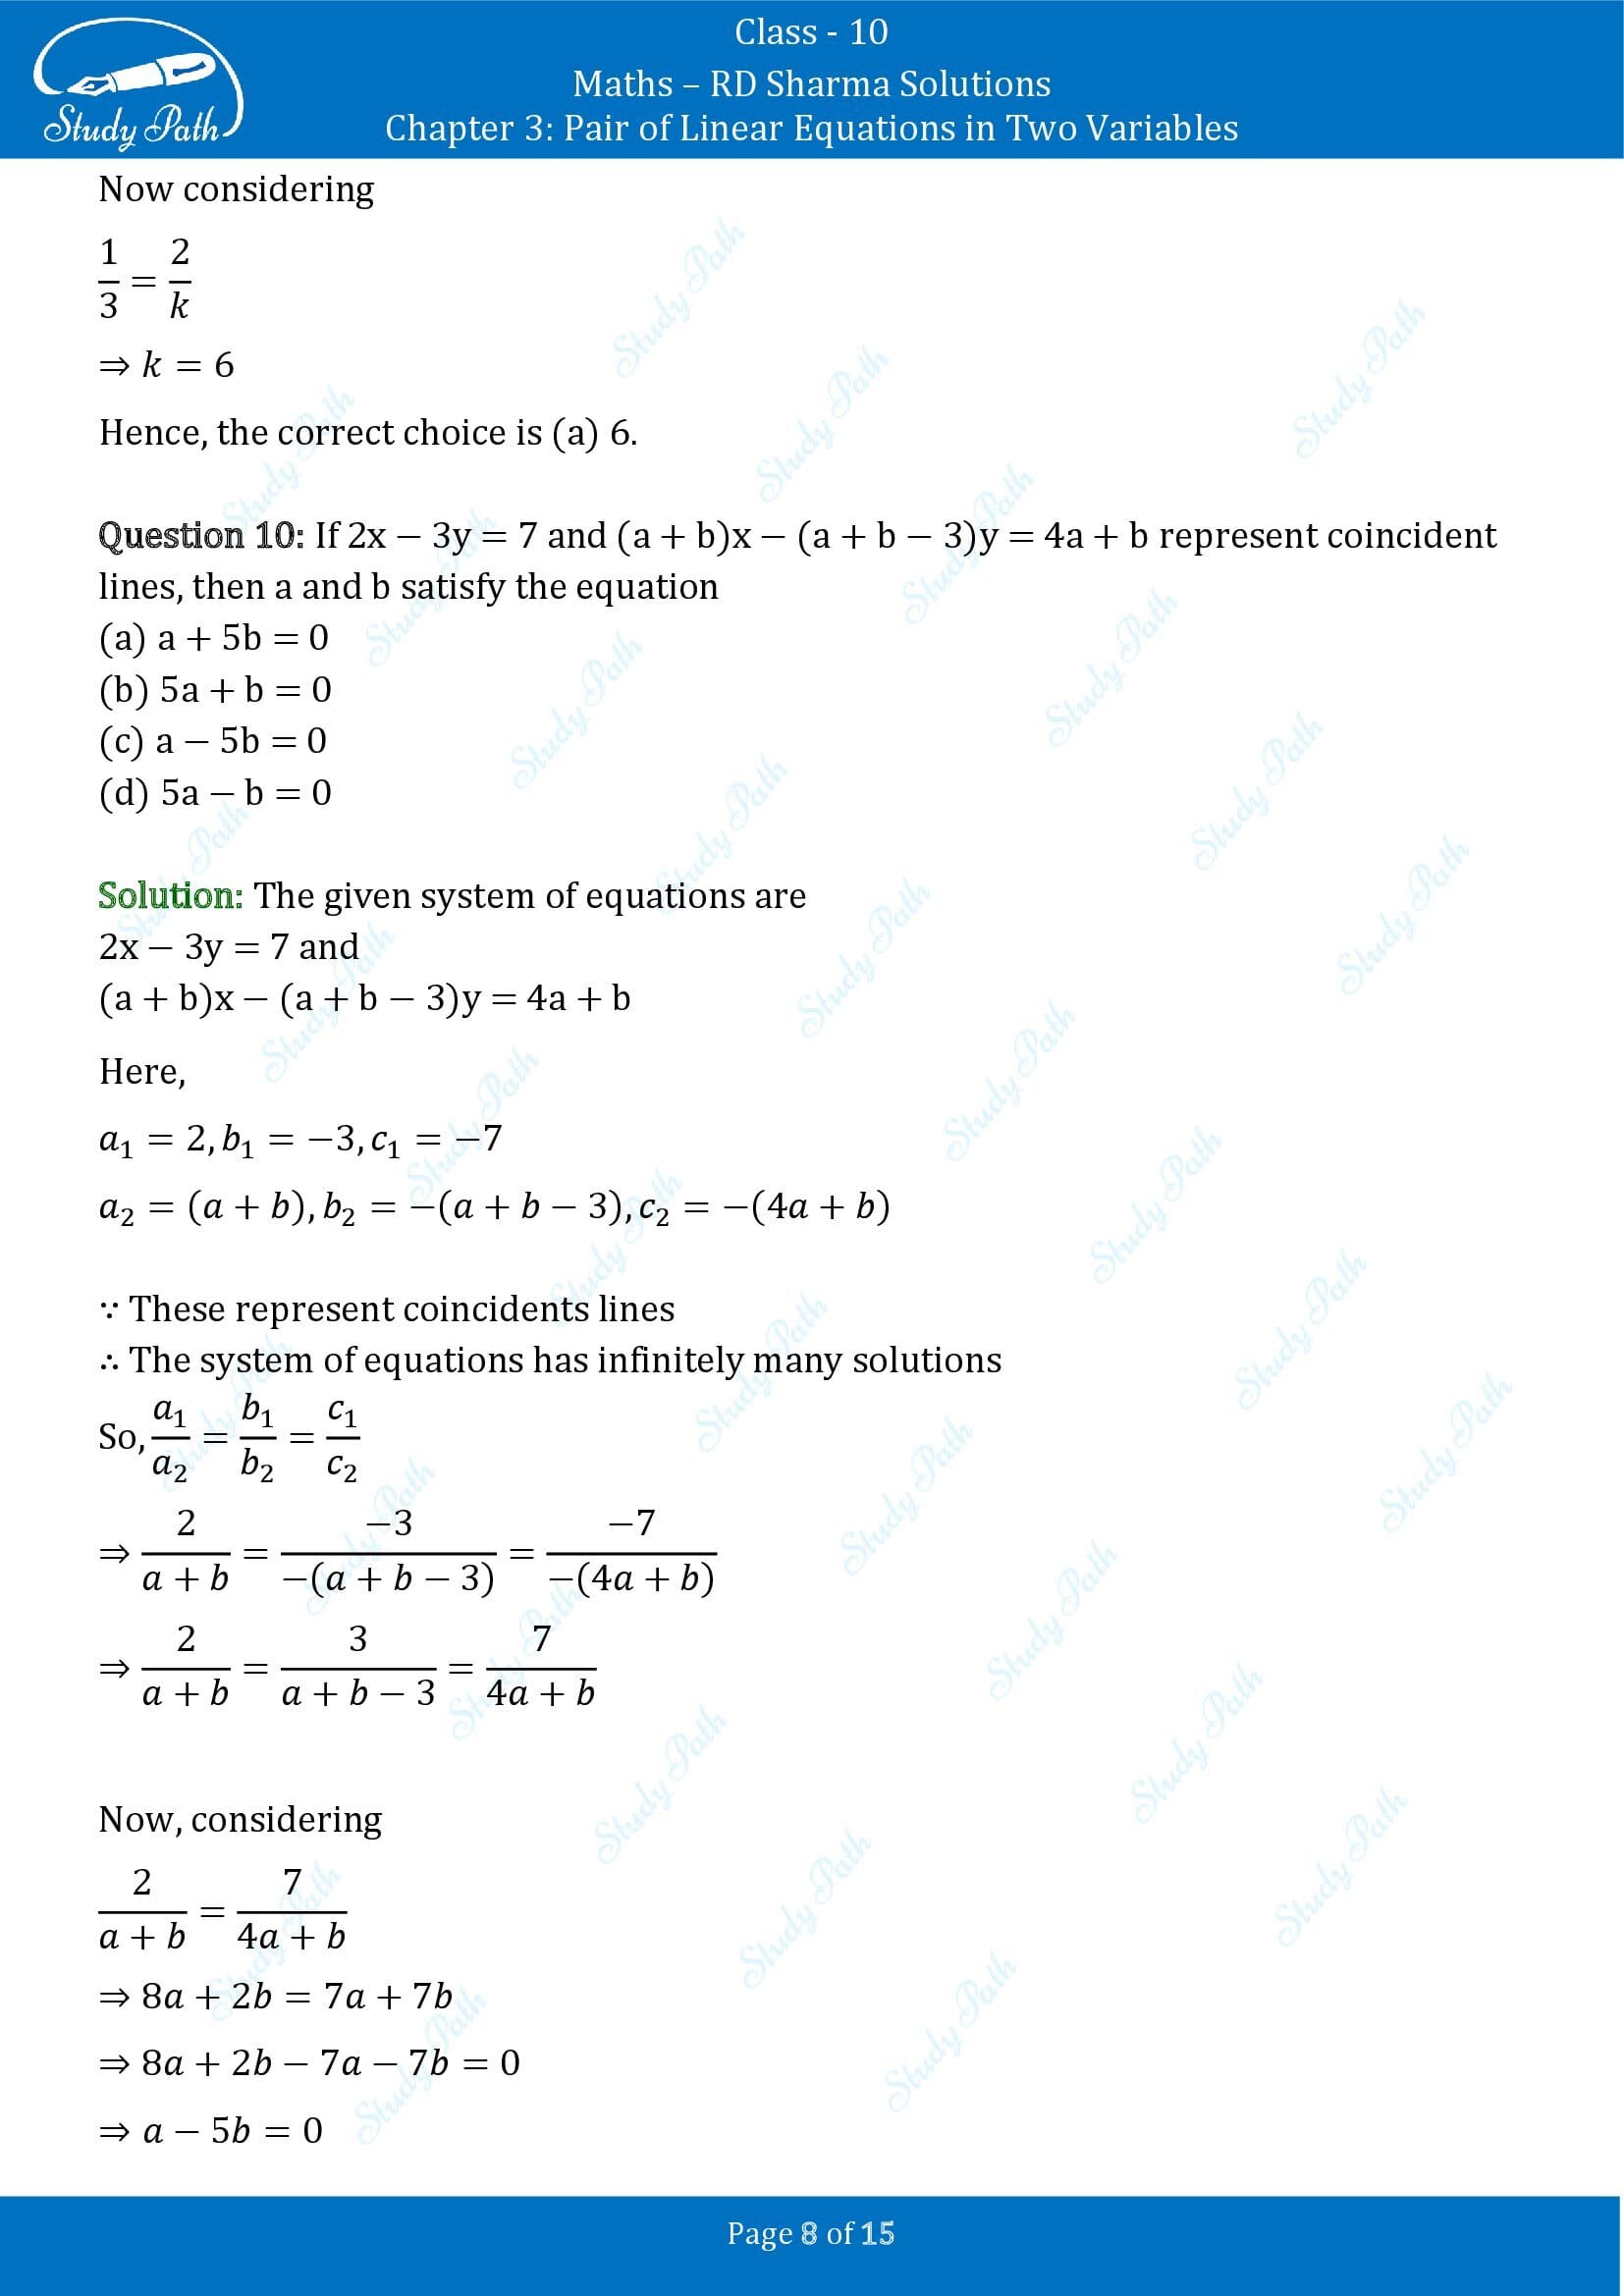 RD Sharma Solutions Class 10 Chapter 3 Pair of Linear Equations in Two Variables Multiple Choice Questions MCQs 00008